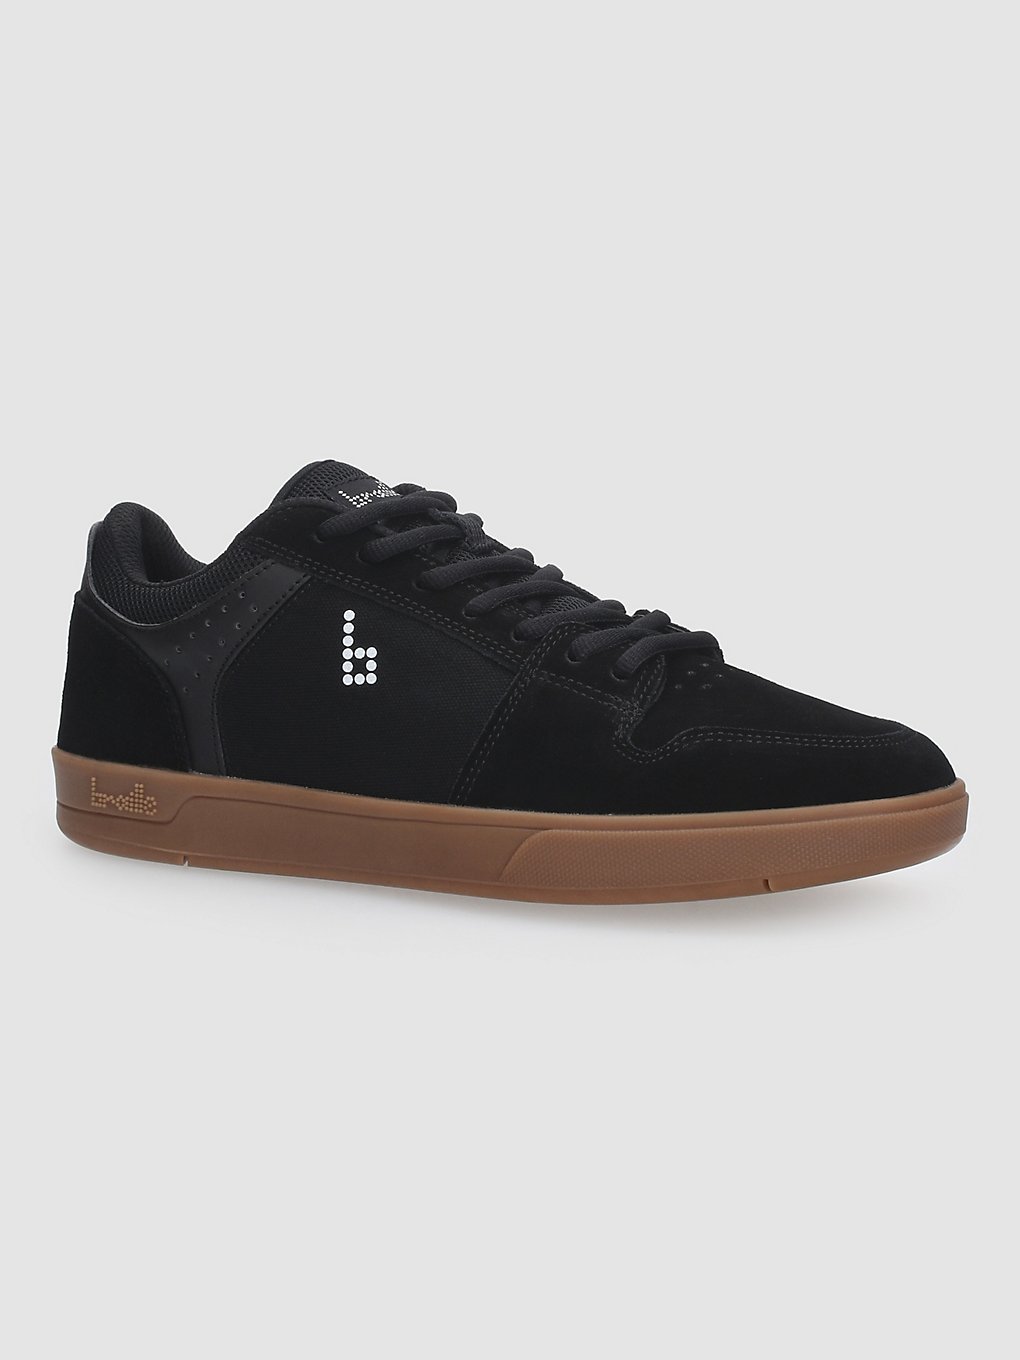 Braille Skateboarding Red Lodge Skate Shoes black with gum kaufen